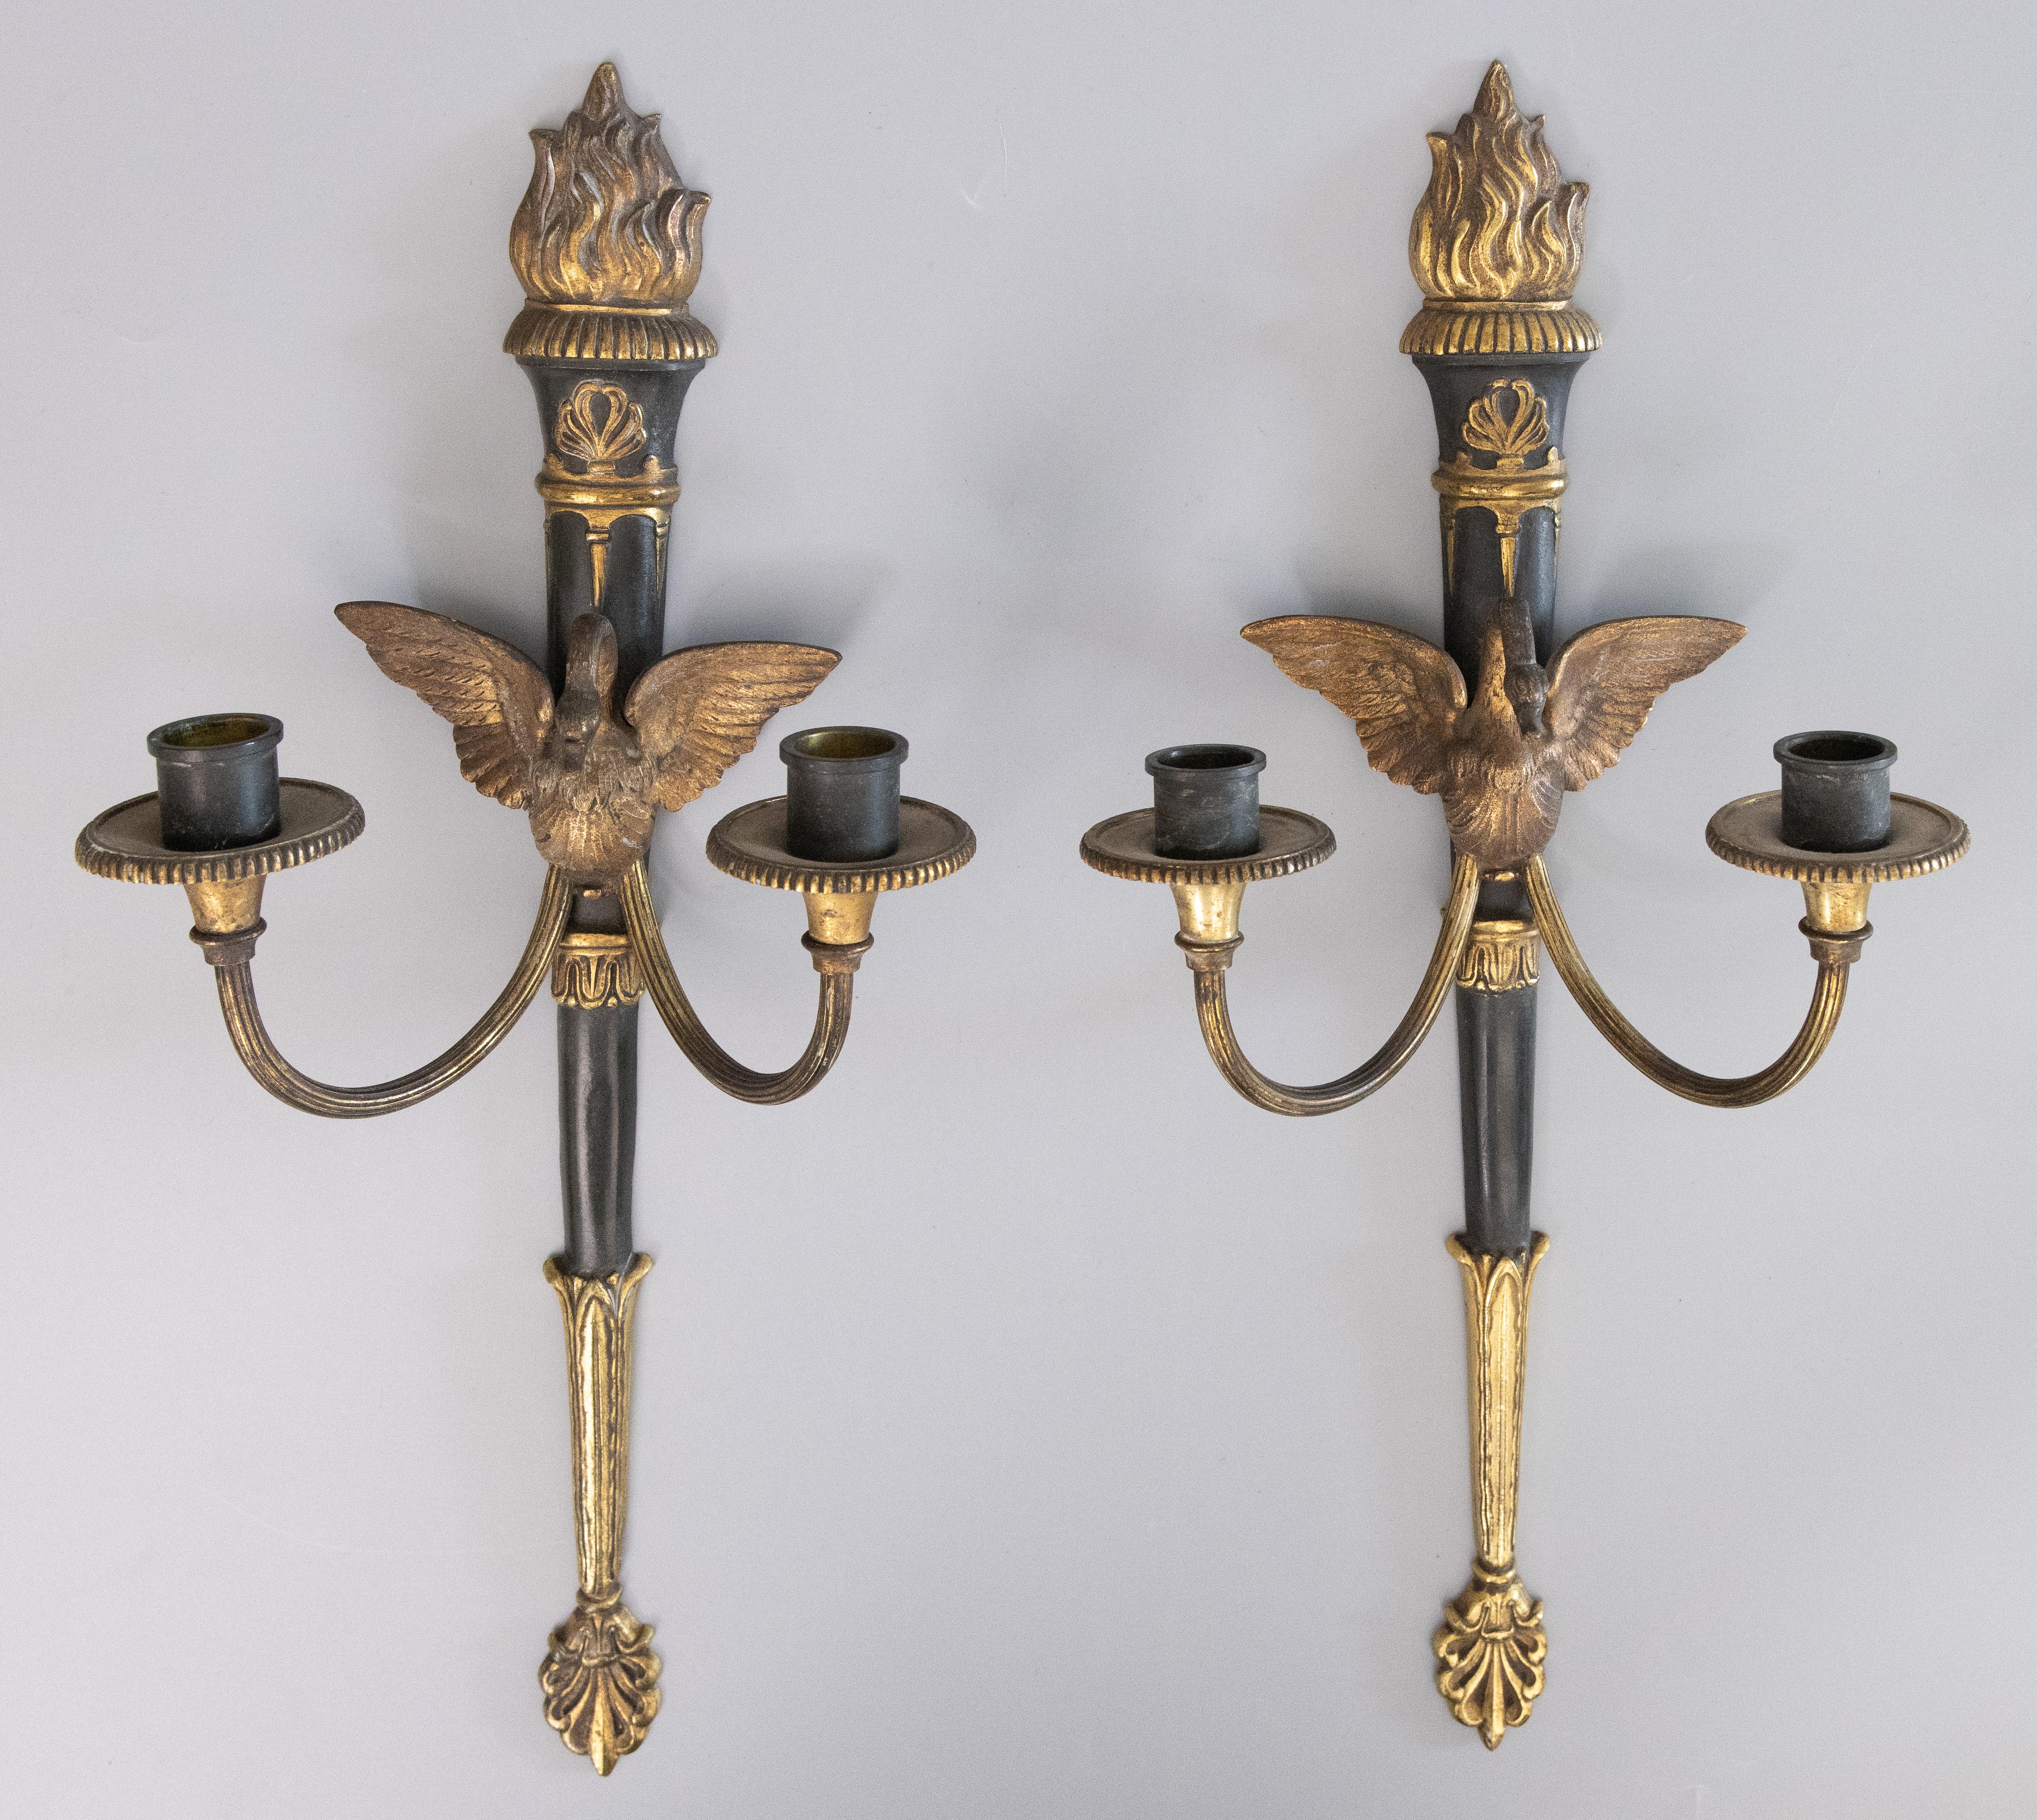 A gorgeous pair of French Empire Style gilded bronze candle sconces, circa 1900. These beautiful sconces are ebonized with gilt swans, torches, and ormolu decorations in a lovely gilt patina.

Dimensions
7.5